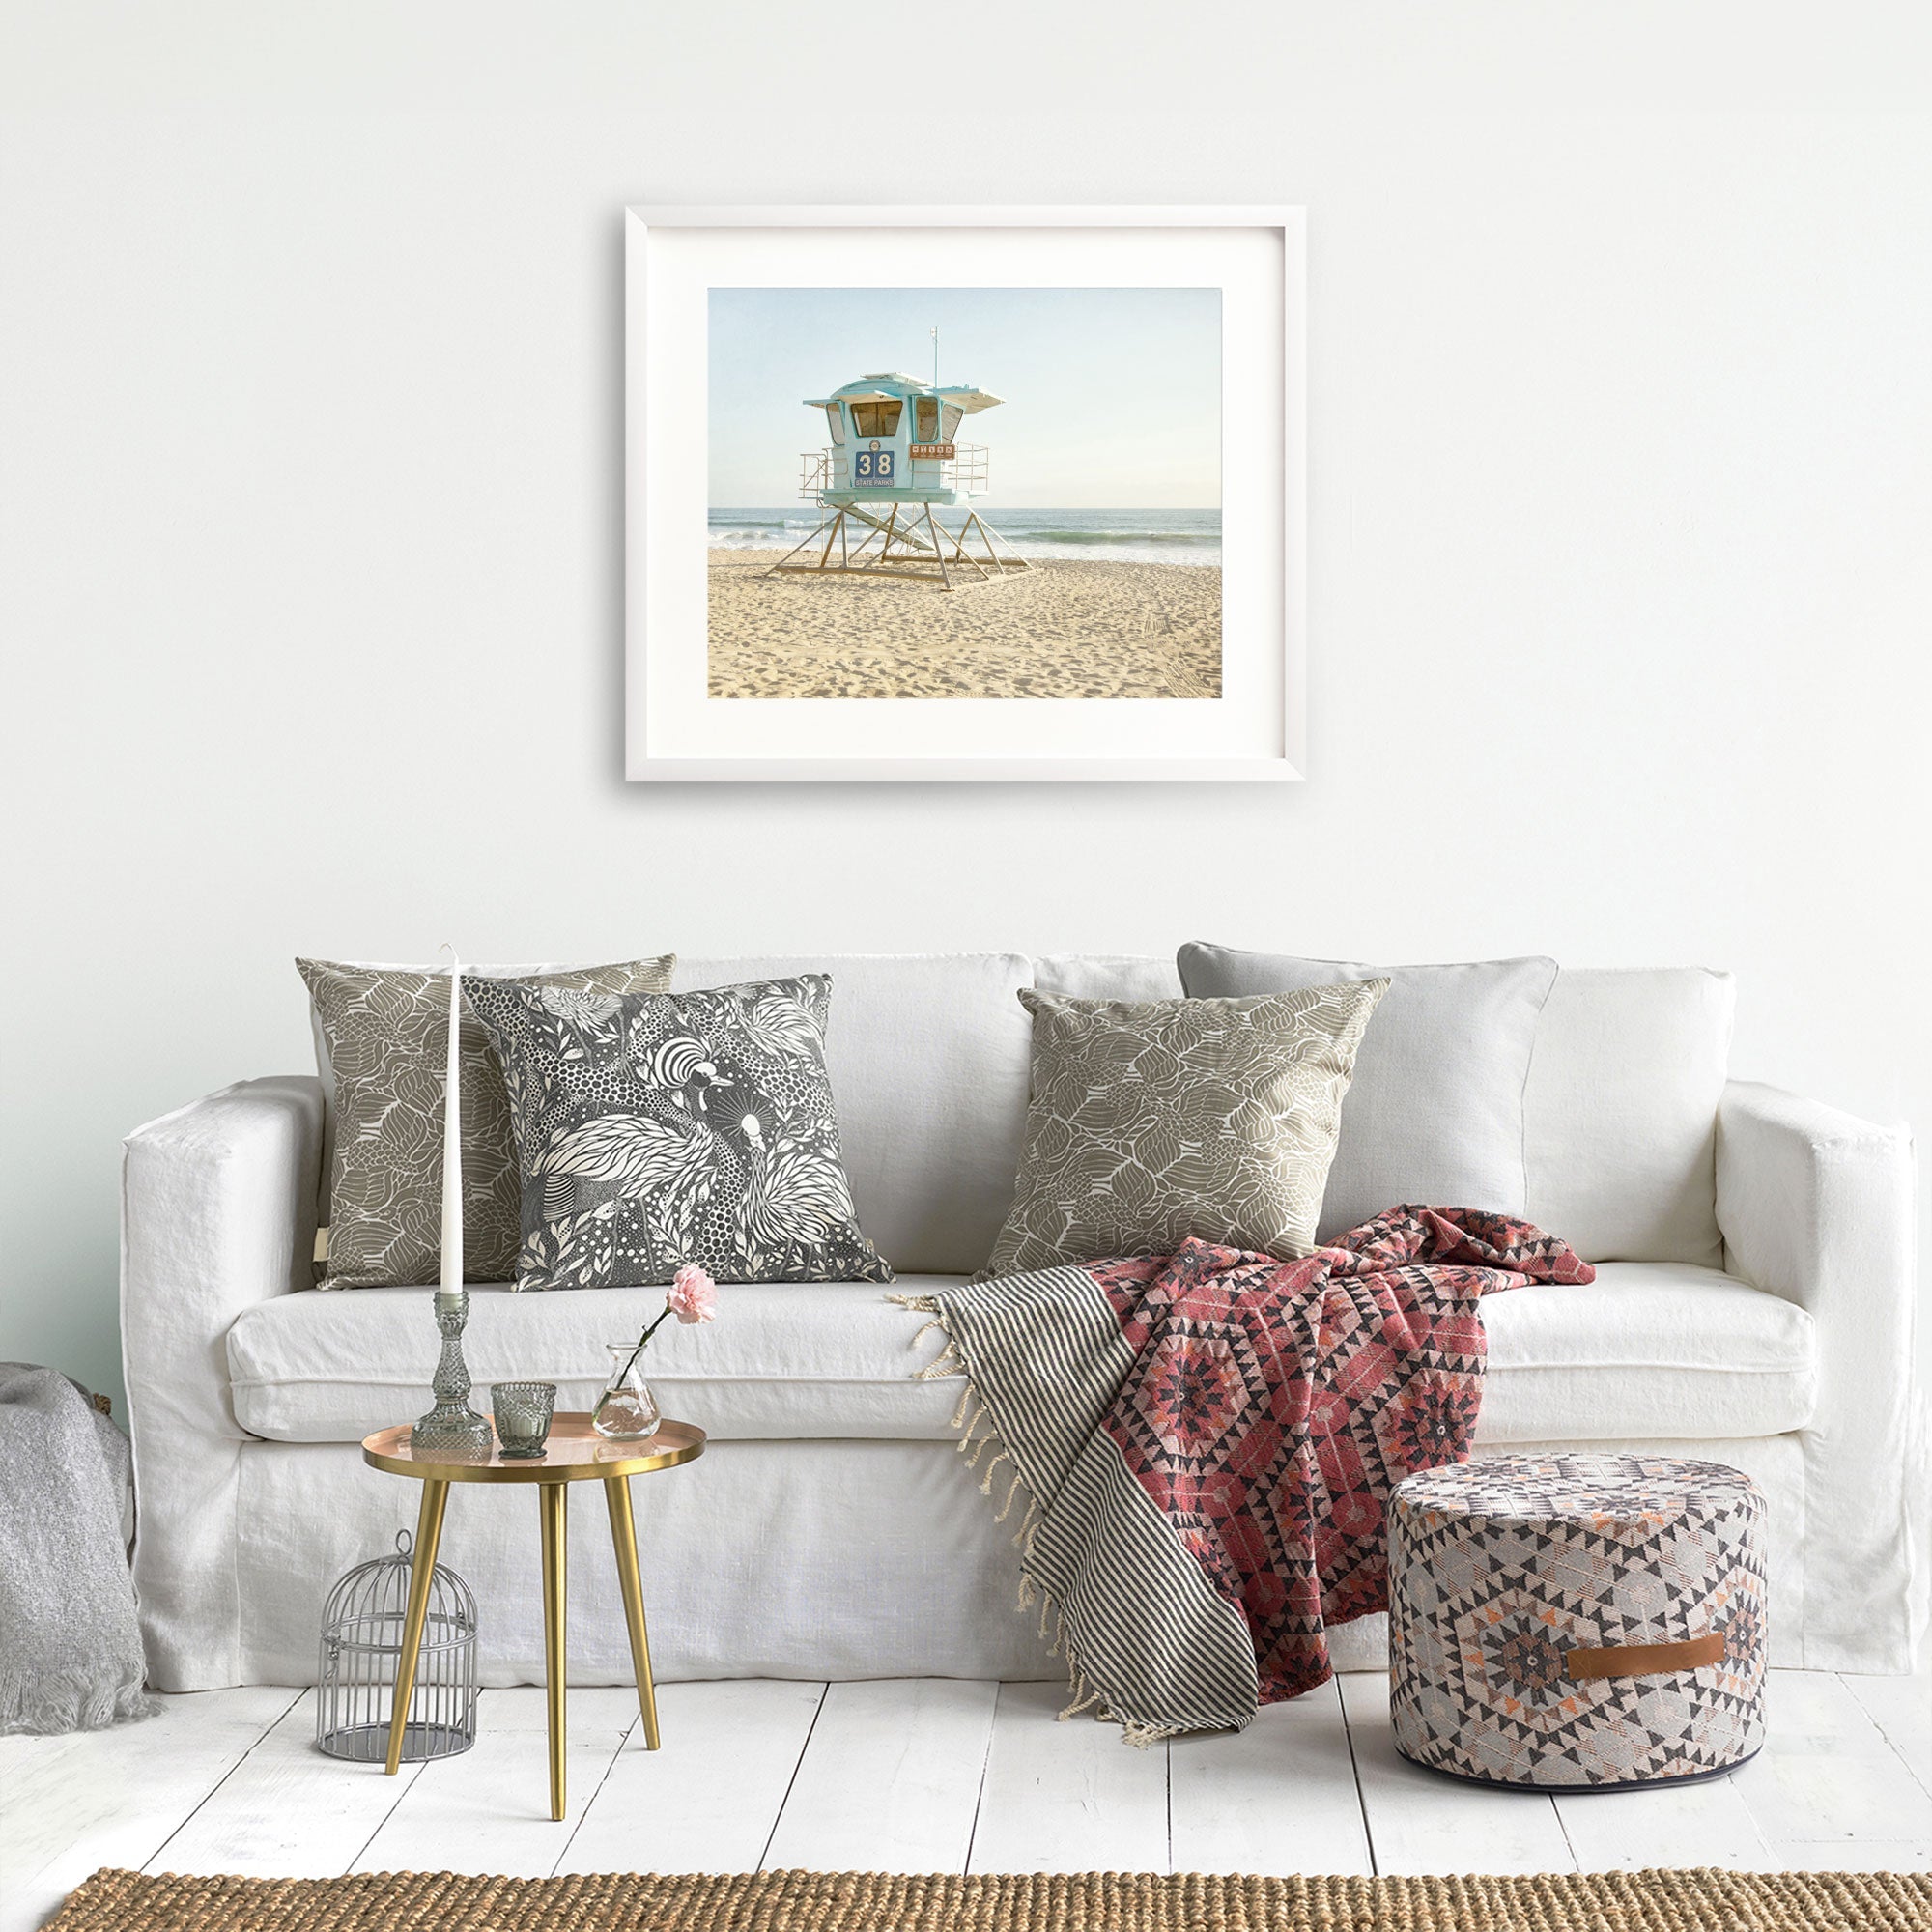 A cozy living room featuring a white sofa adorned with patterned cushions, a small table with decor, a wicker ottoman, and a framed print of the California Coastal Print, &#39;Carlsbad Lifeguard Tower&#39; by Offley Green hanging on the wall.